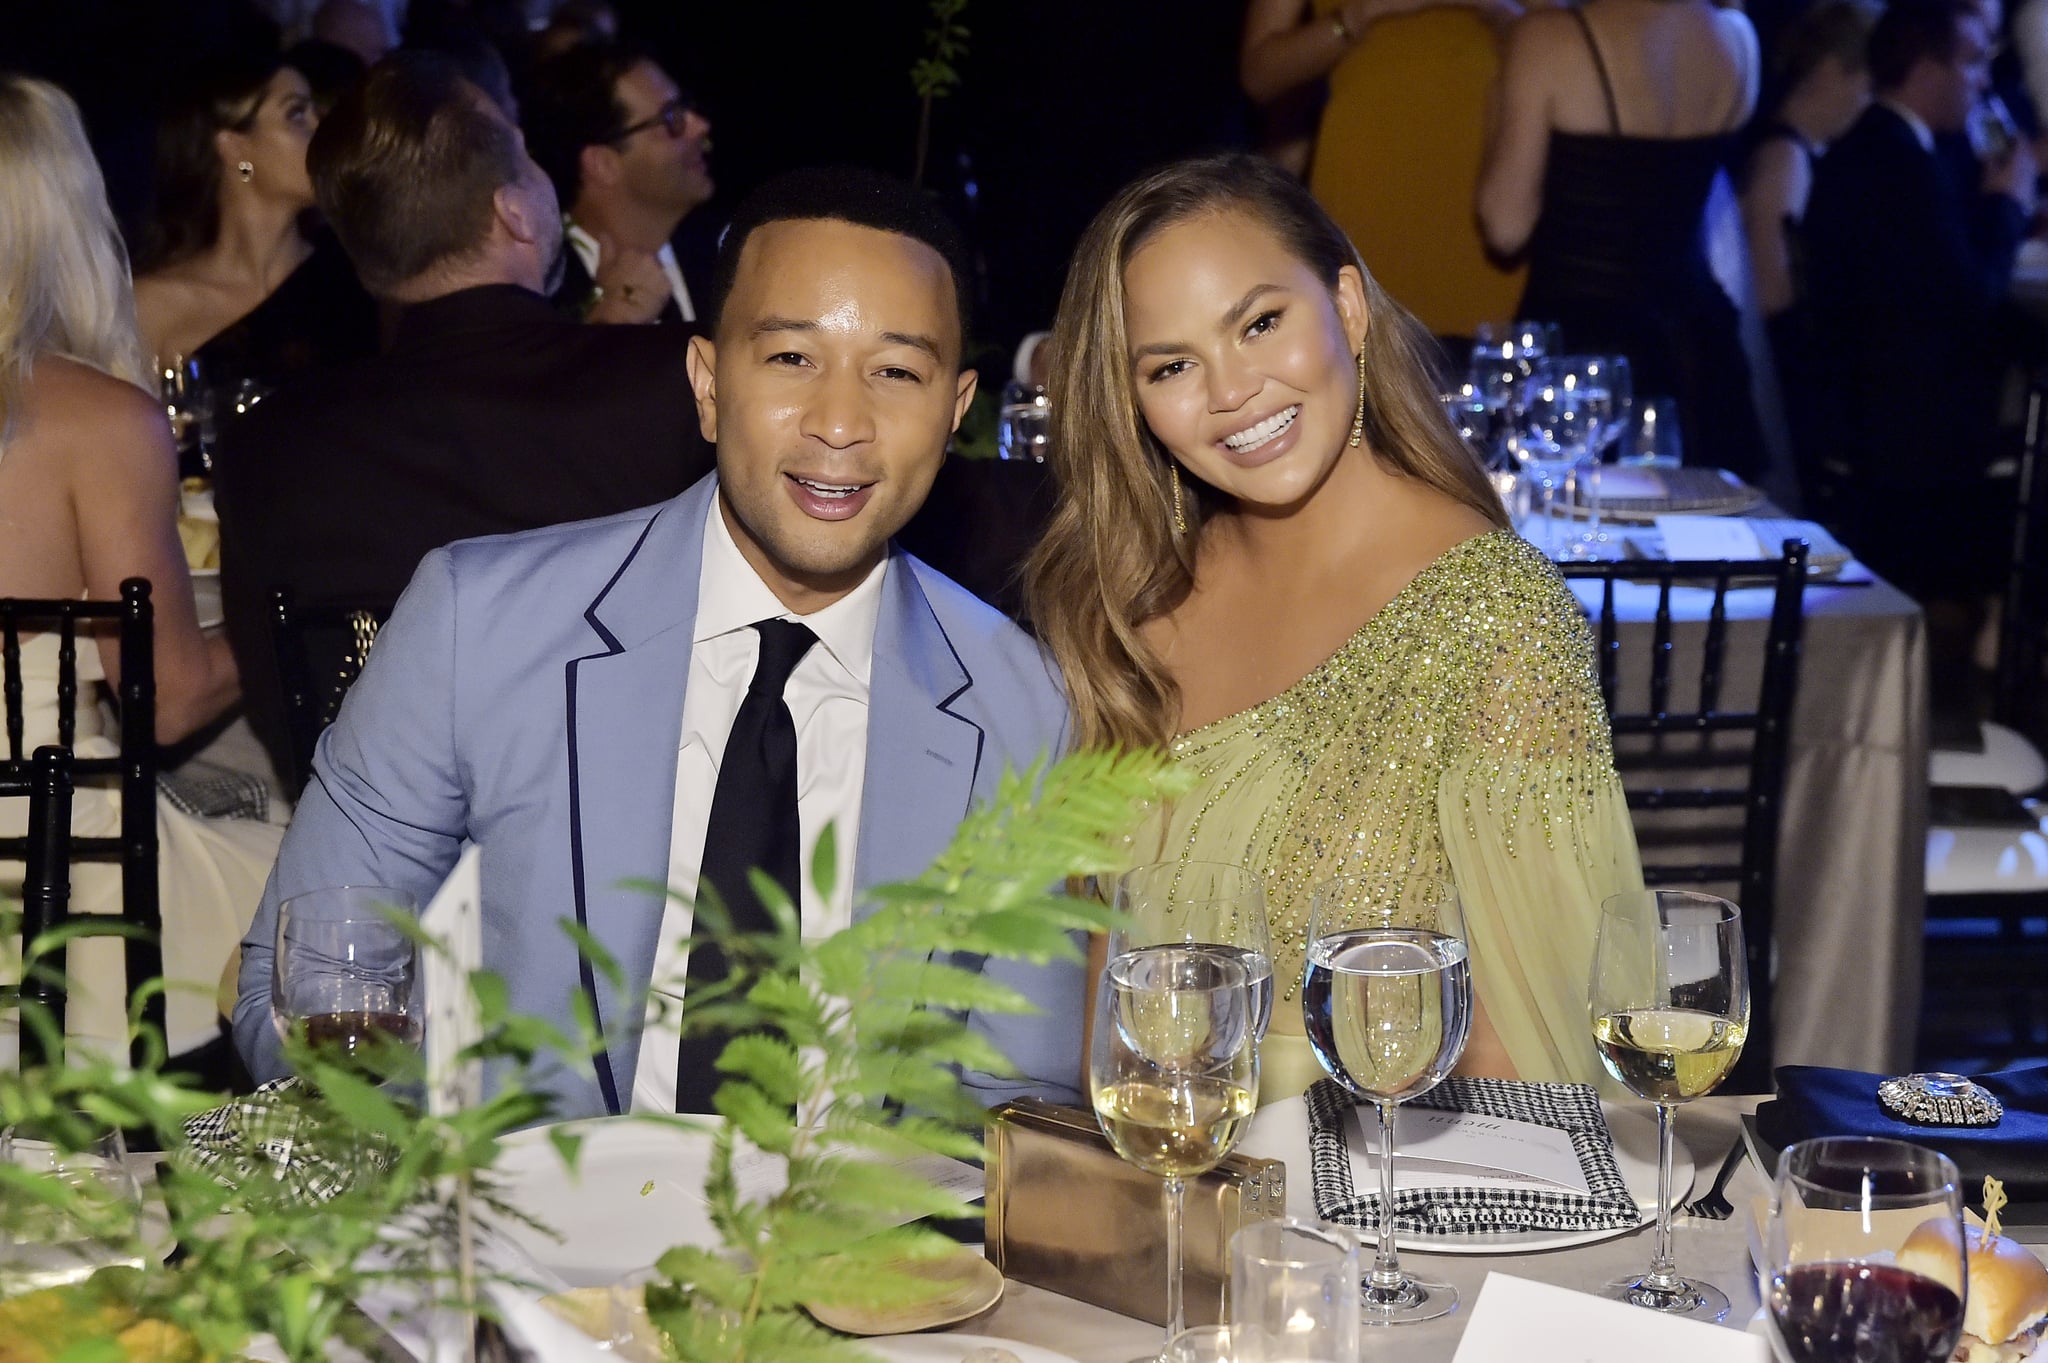 LOS ANGELES, CALIFORNIA - NOVEMBER 09: John Legend and Chrissy Teigen attend the 2019 Baby2Baby Gala presented by Paul Mitchell on November 09, 2019 in Los Angeles, California. (Photo by Stefanie Keenan/Getty Images for Baby2Baby)